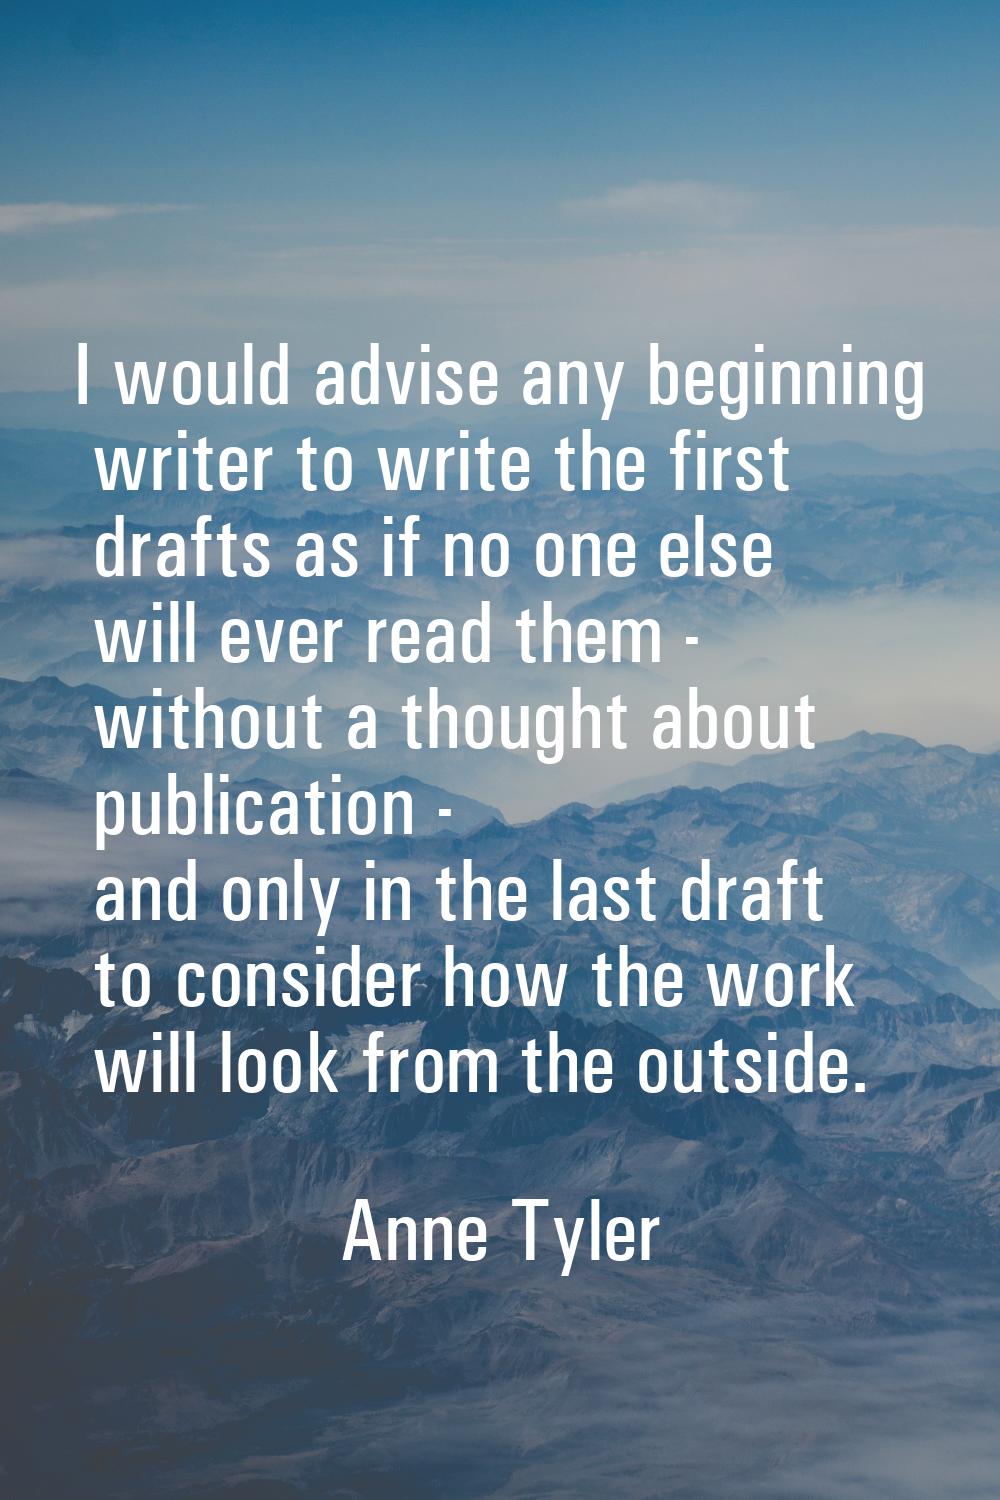 I would advise any beginning writer to write the first drafts as if no one else will ever read them